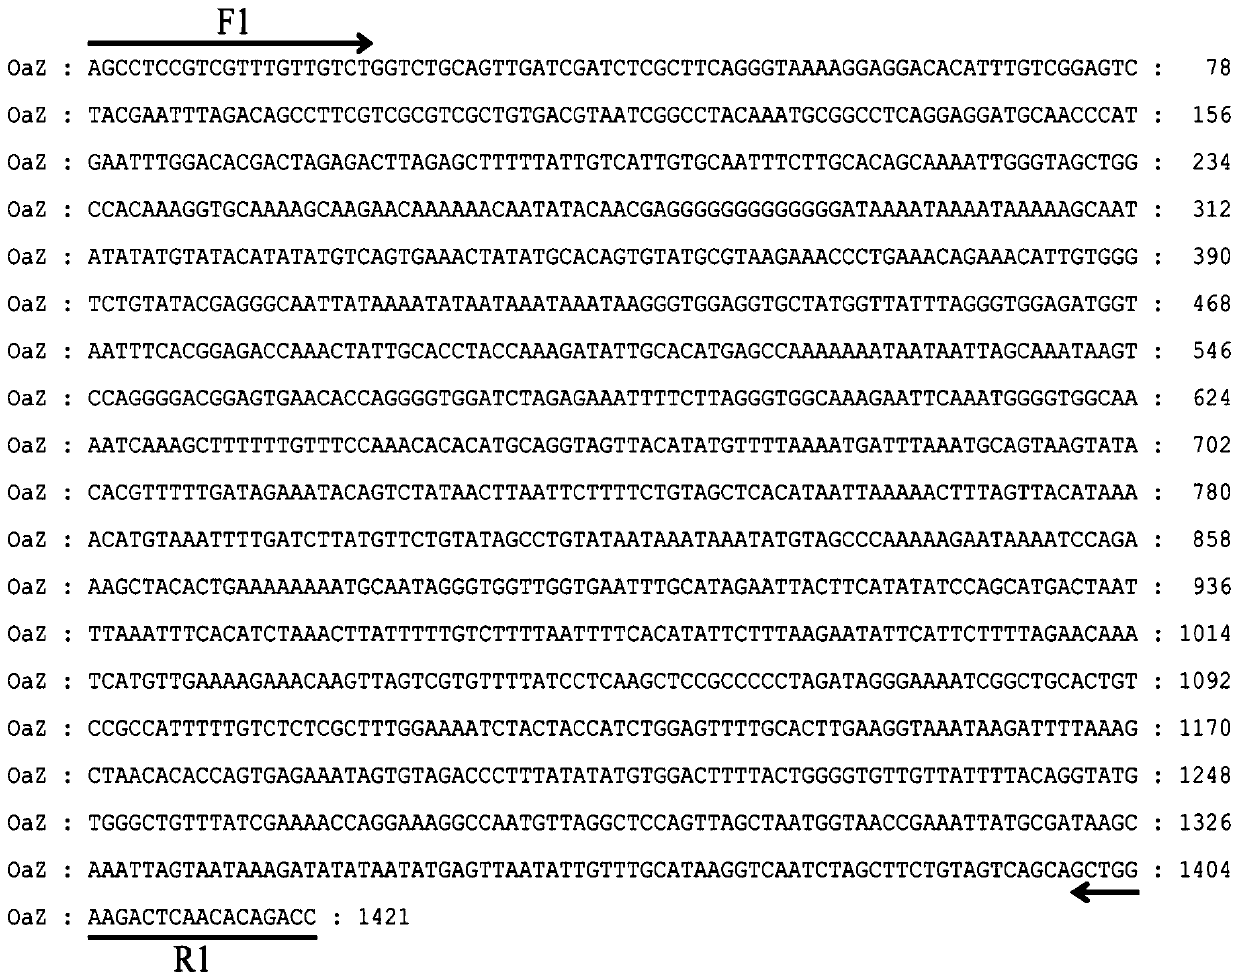 Sex chromosome specific molecular marker of Oreochromis aureus and genetic sex identification and monosexual fish production method based on the same